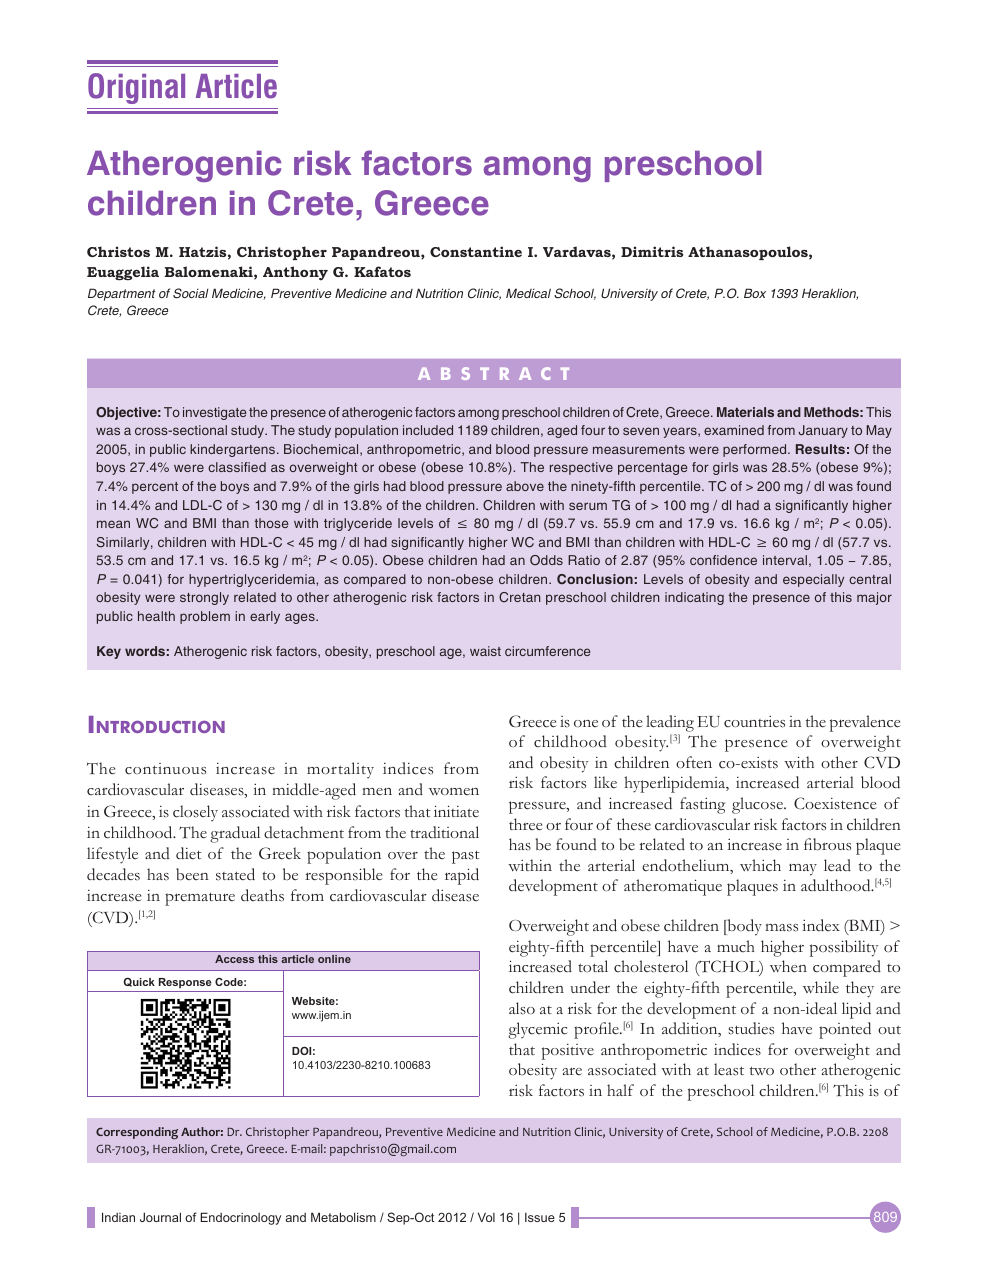 Atherogenic Risk Factors Among Preschool Children In Crete Greece Topic Of Research Paper In Health Sciences Download Scholarly Article Pdf And Read For Free On Cyberleninka Open Science Hub